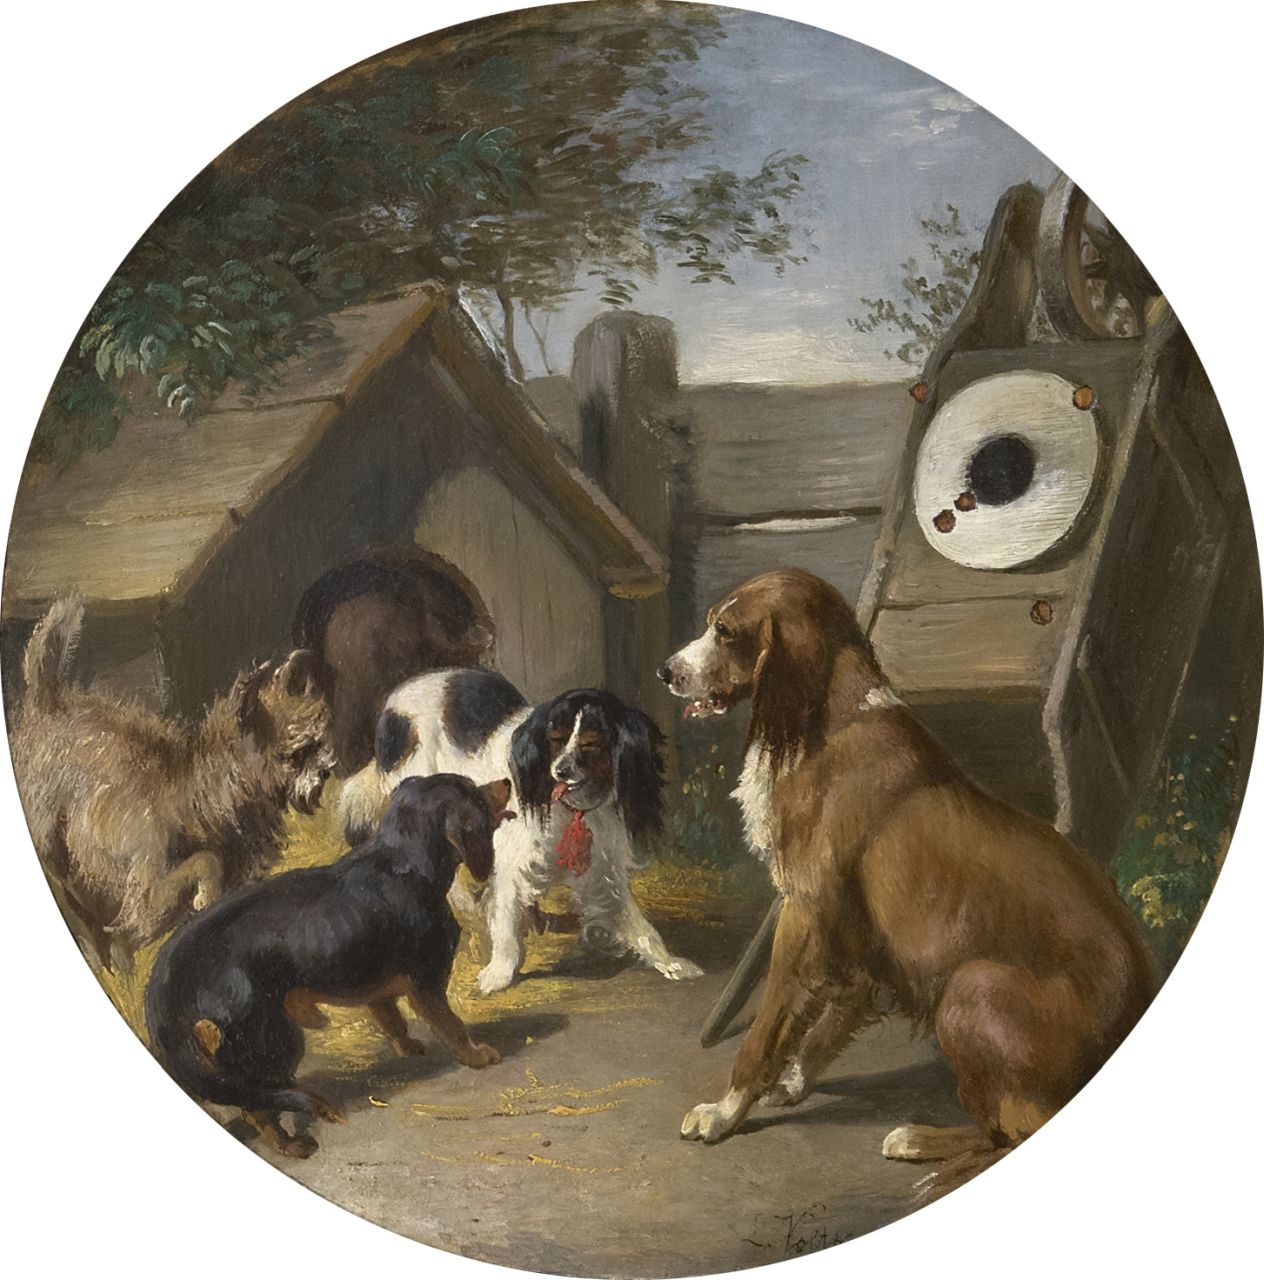 Voltz L.G.  | 'Ludwig' Gustav Voltz, Four dogs near a shed, oil on paper laid down on panel 24.8 x 24.6 cm, signed l.r.